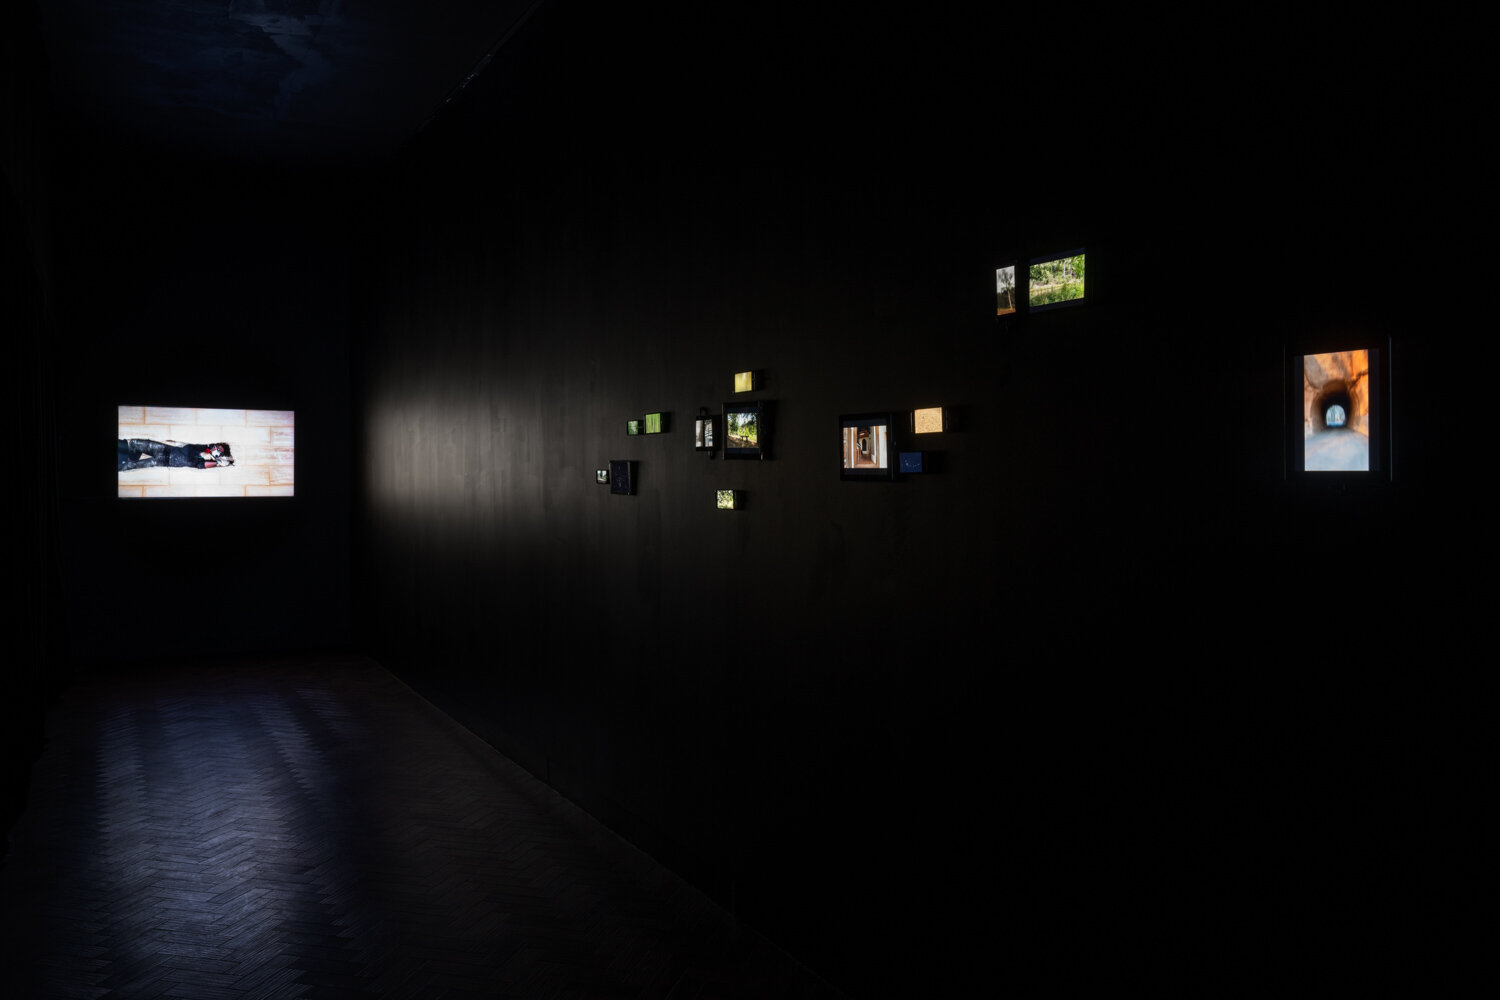  ‘The Tunnel’ (2007-2020). 14 iPads, iPhones, iPod touches and iPad minis looped videos, dimensions variable. Photo: Mark Pokorny.  